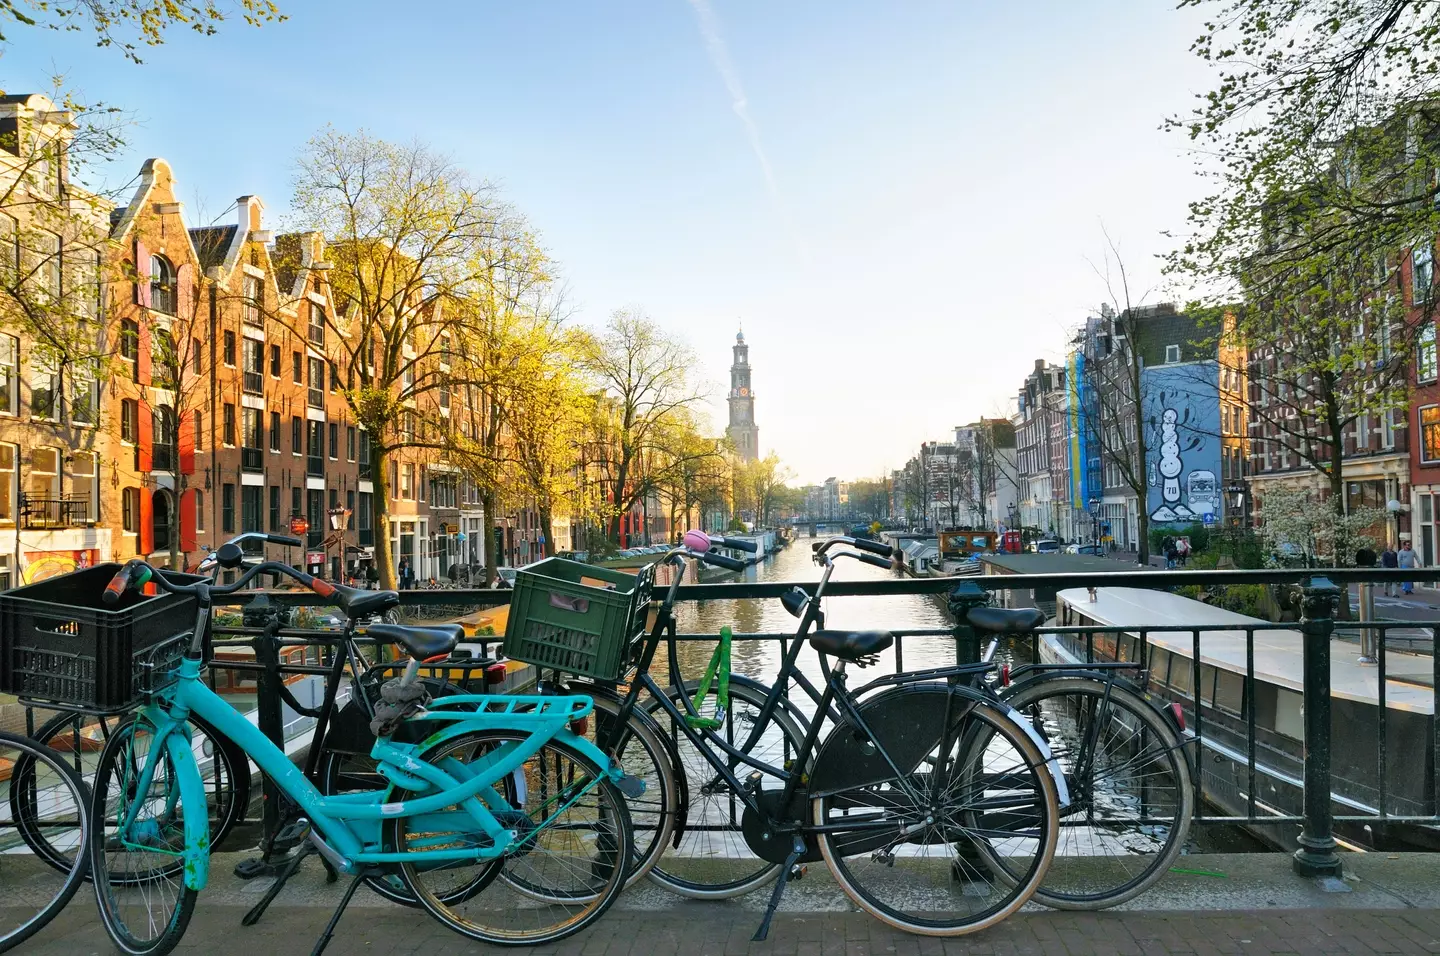 Amsterdam is typically associated with its cannabis and sex workers, rather than its beautiful landscapes.